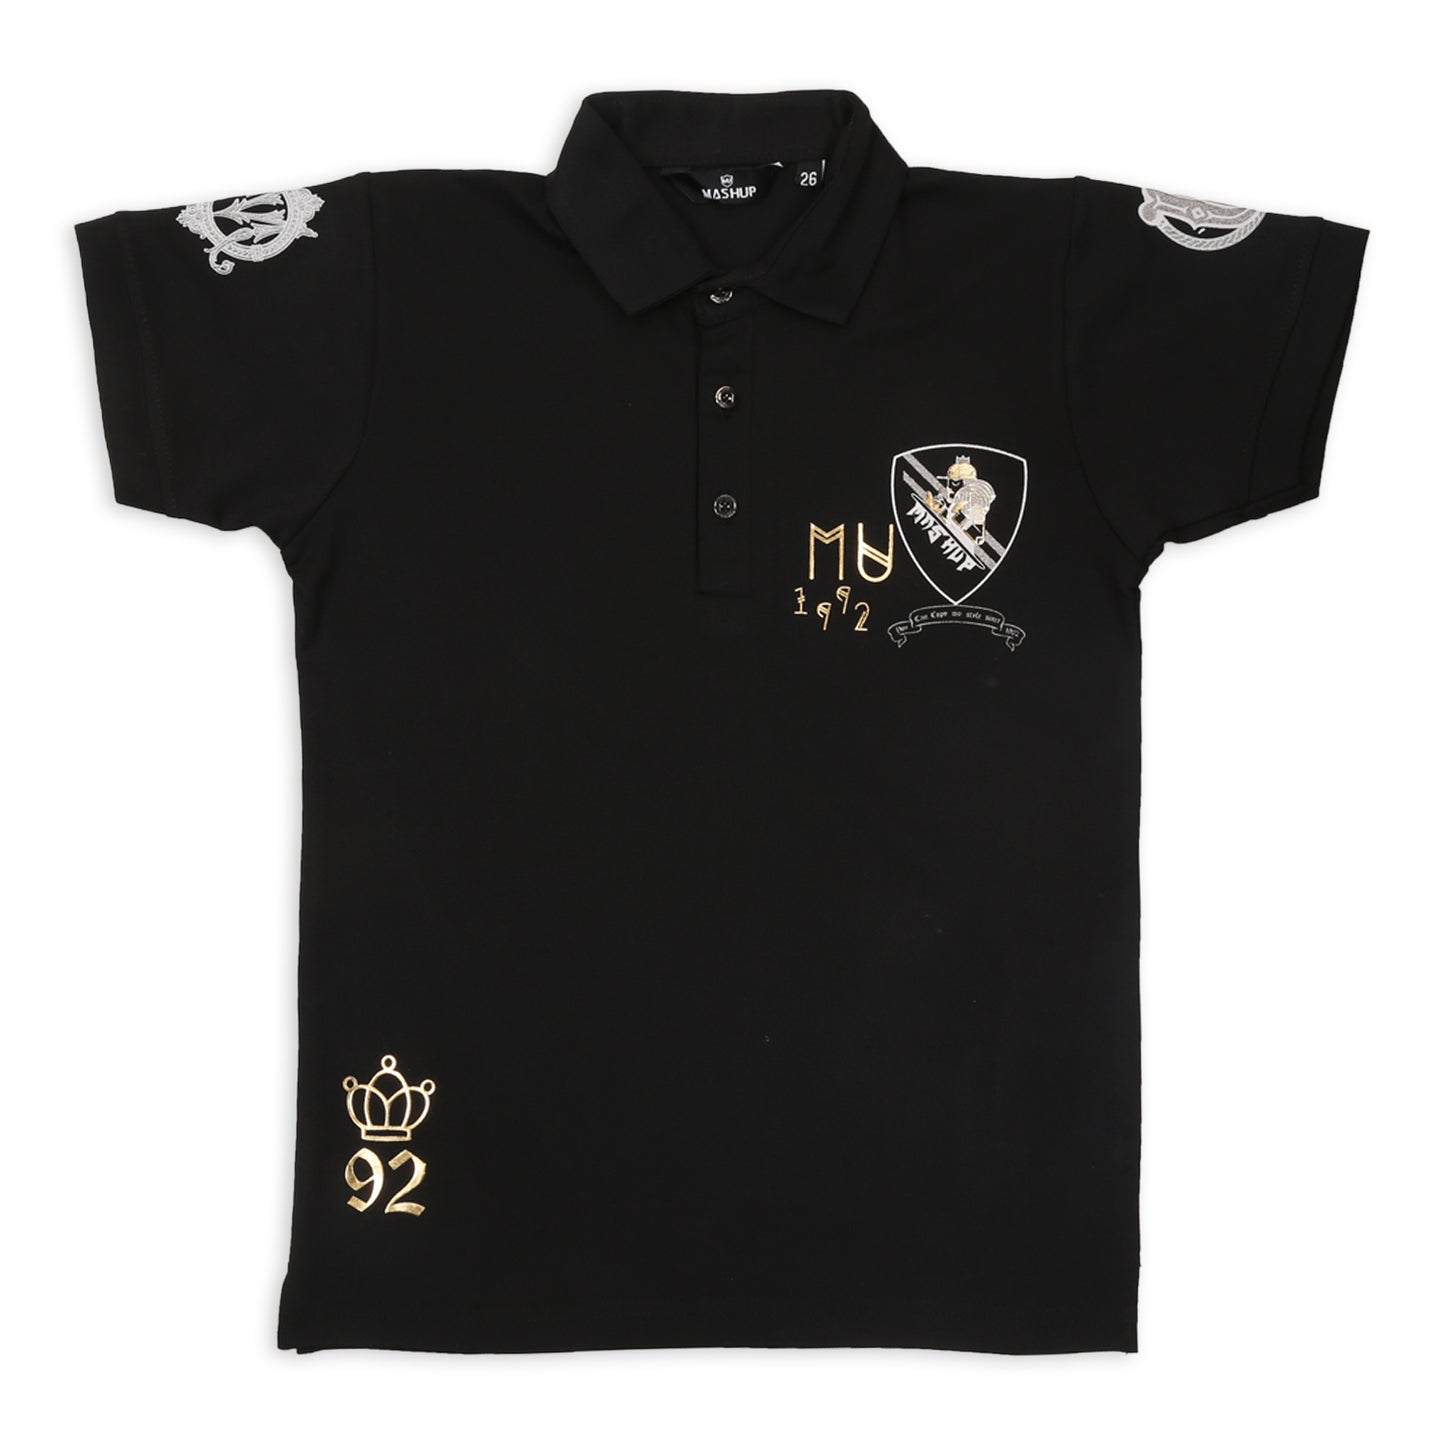 Unleash Confidence: The Ultimate Boys' Polo for Ageless Casual Charm!